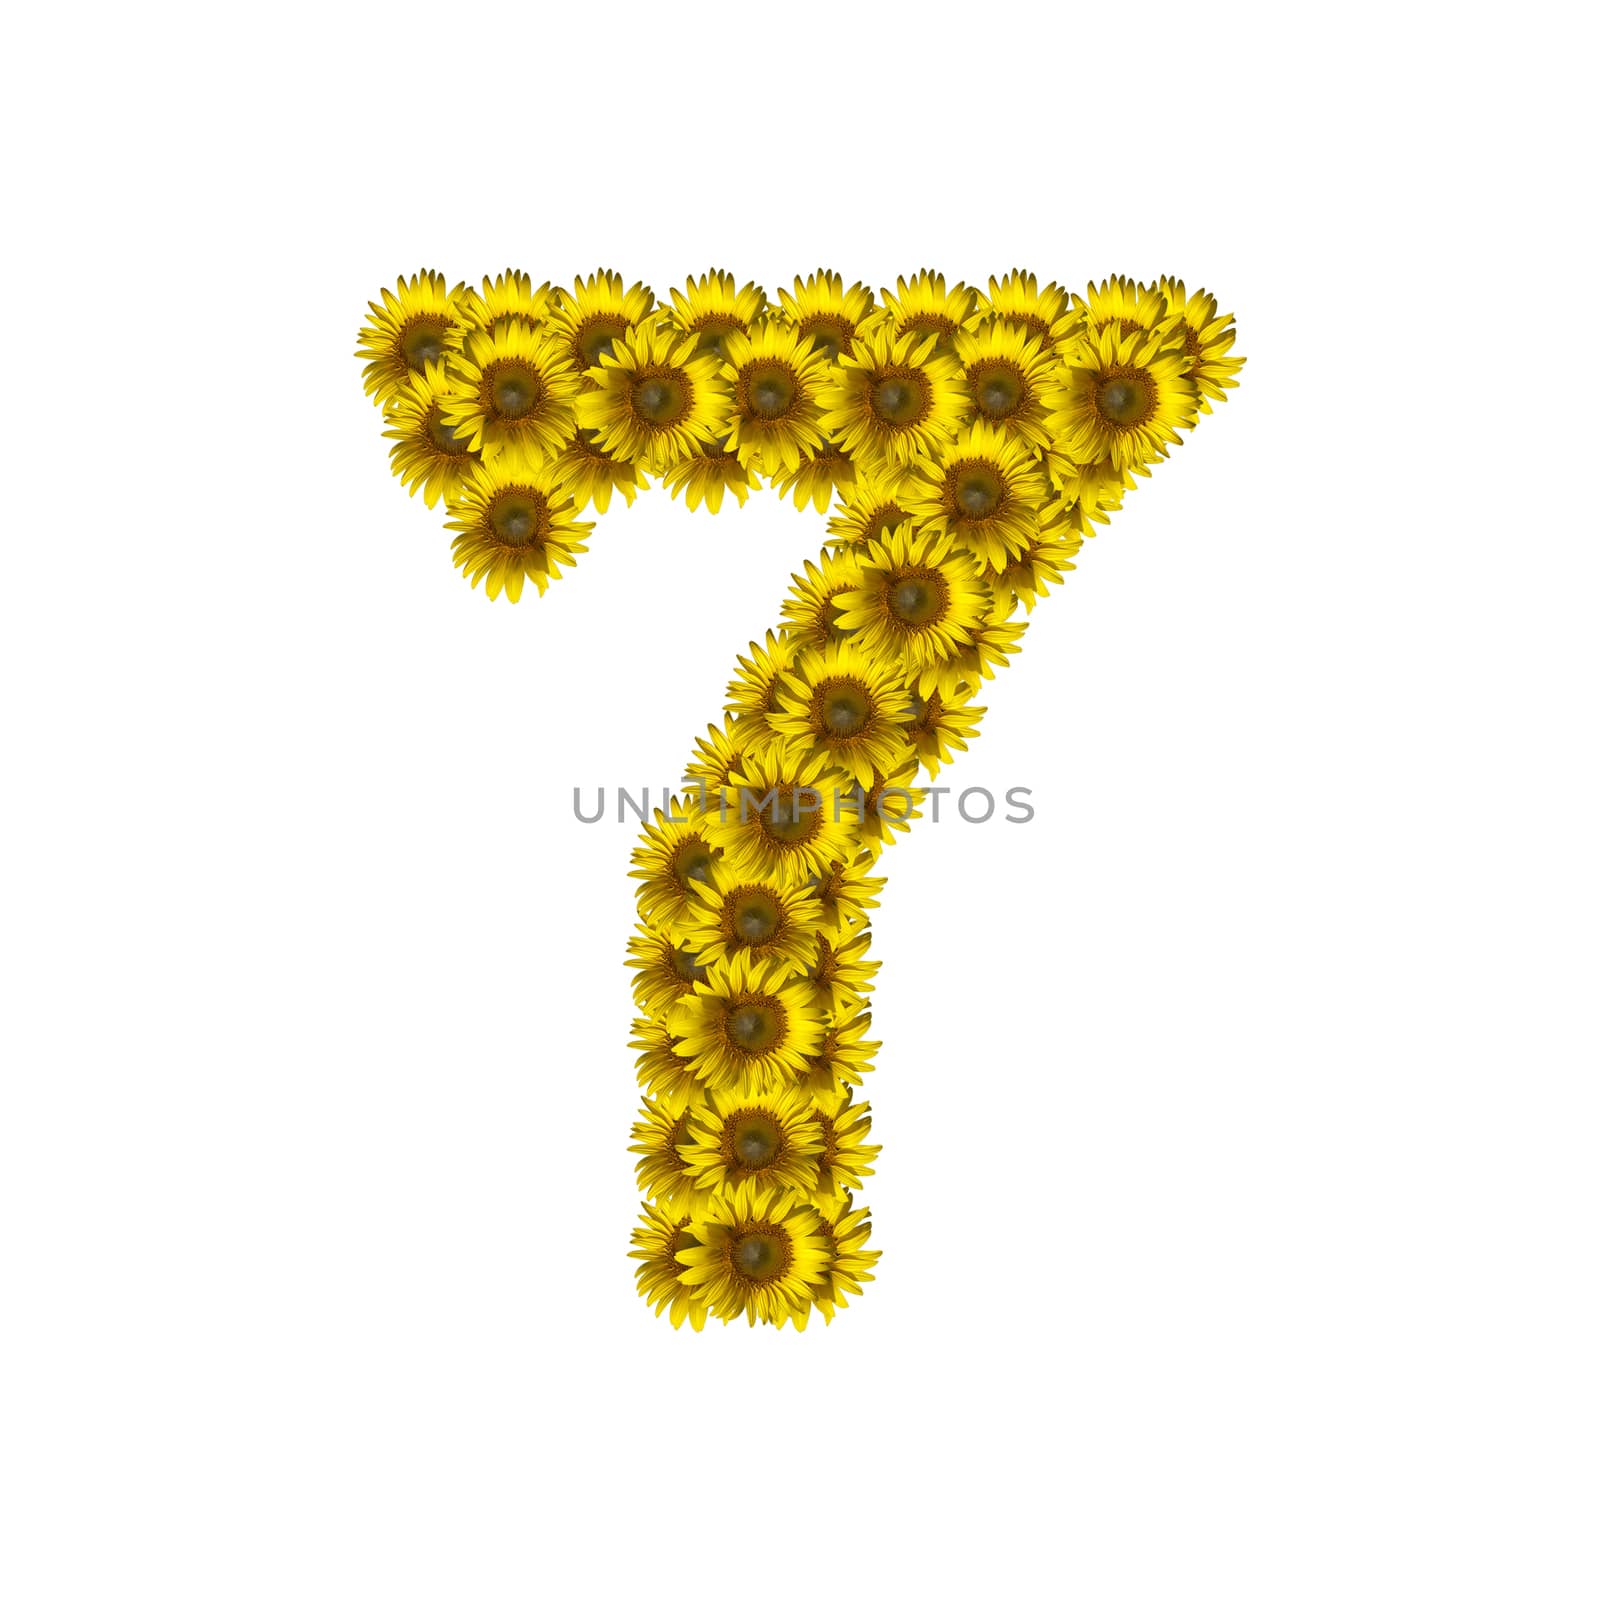 Sunflower number isolated on white background, number 7